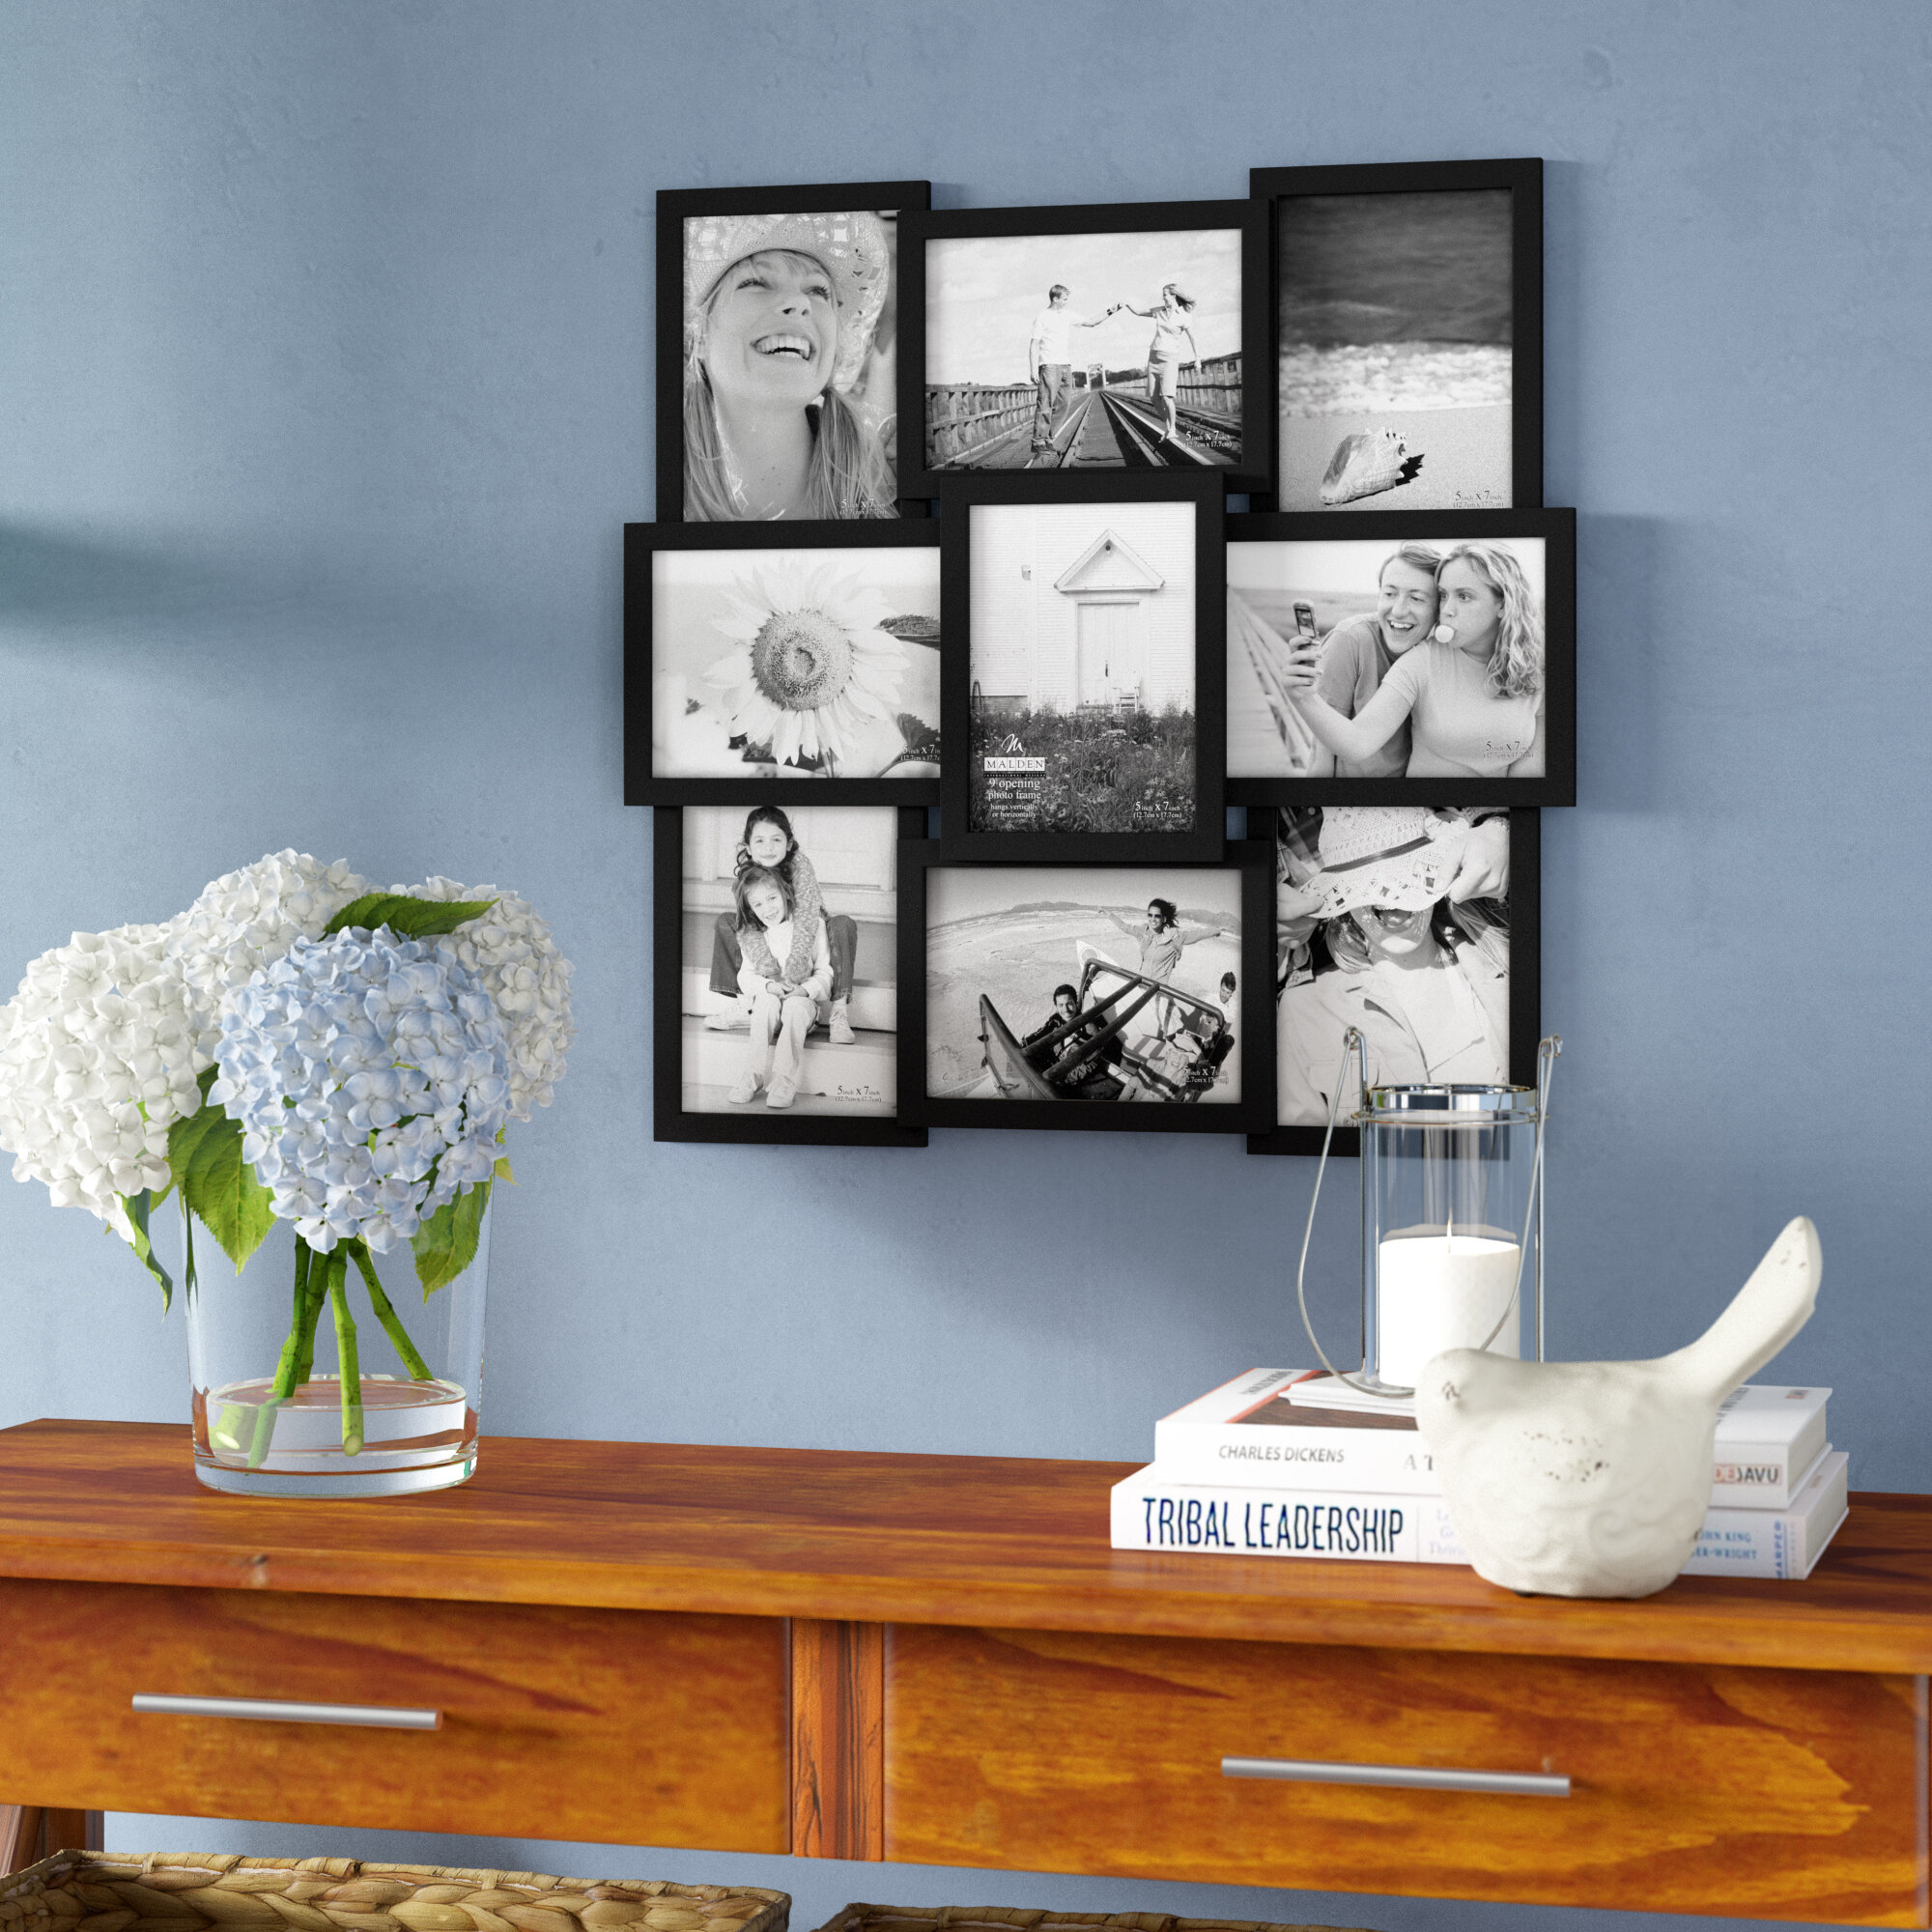 Collage Multiple Picture Frames for 6 Photos in 4 x 6 Inches Wooden, MDF  Wall Mounting Frame (Natural)